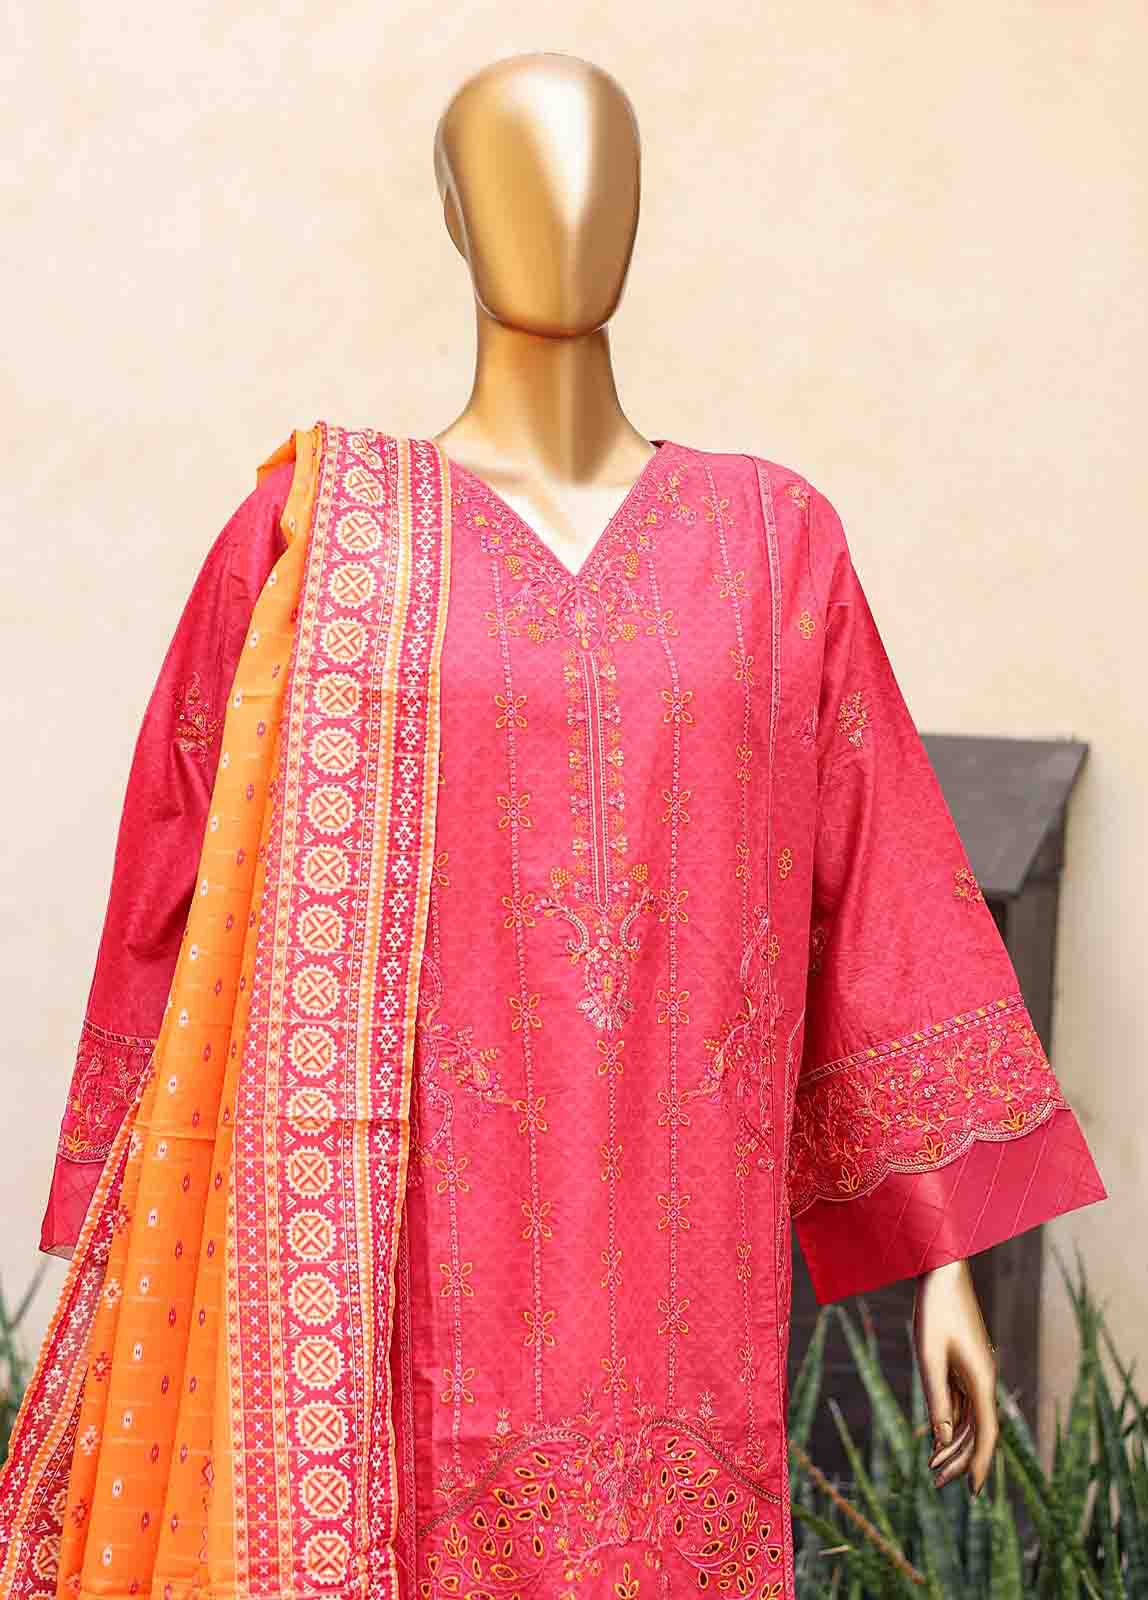 SMLF-EMB-448 B - 3 Piece Embroidered Stitched Suit